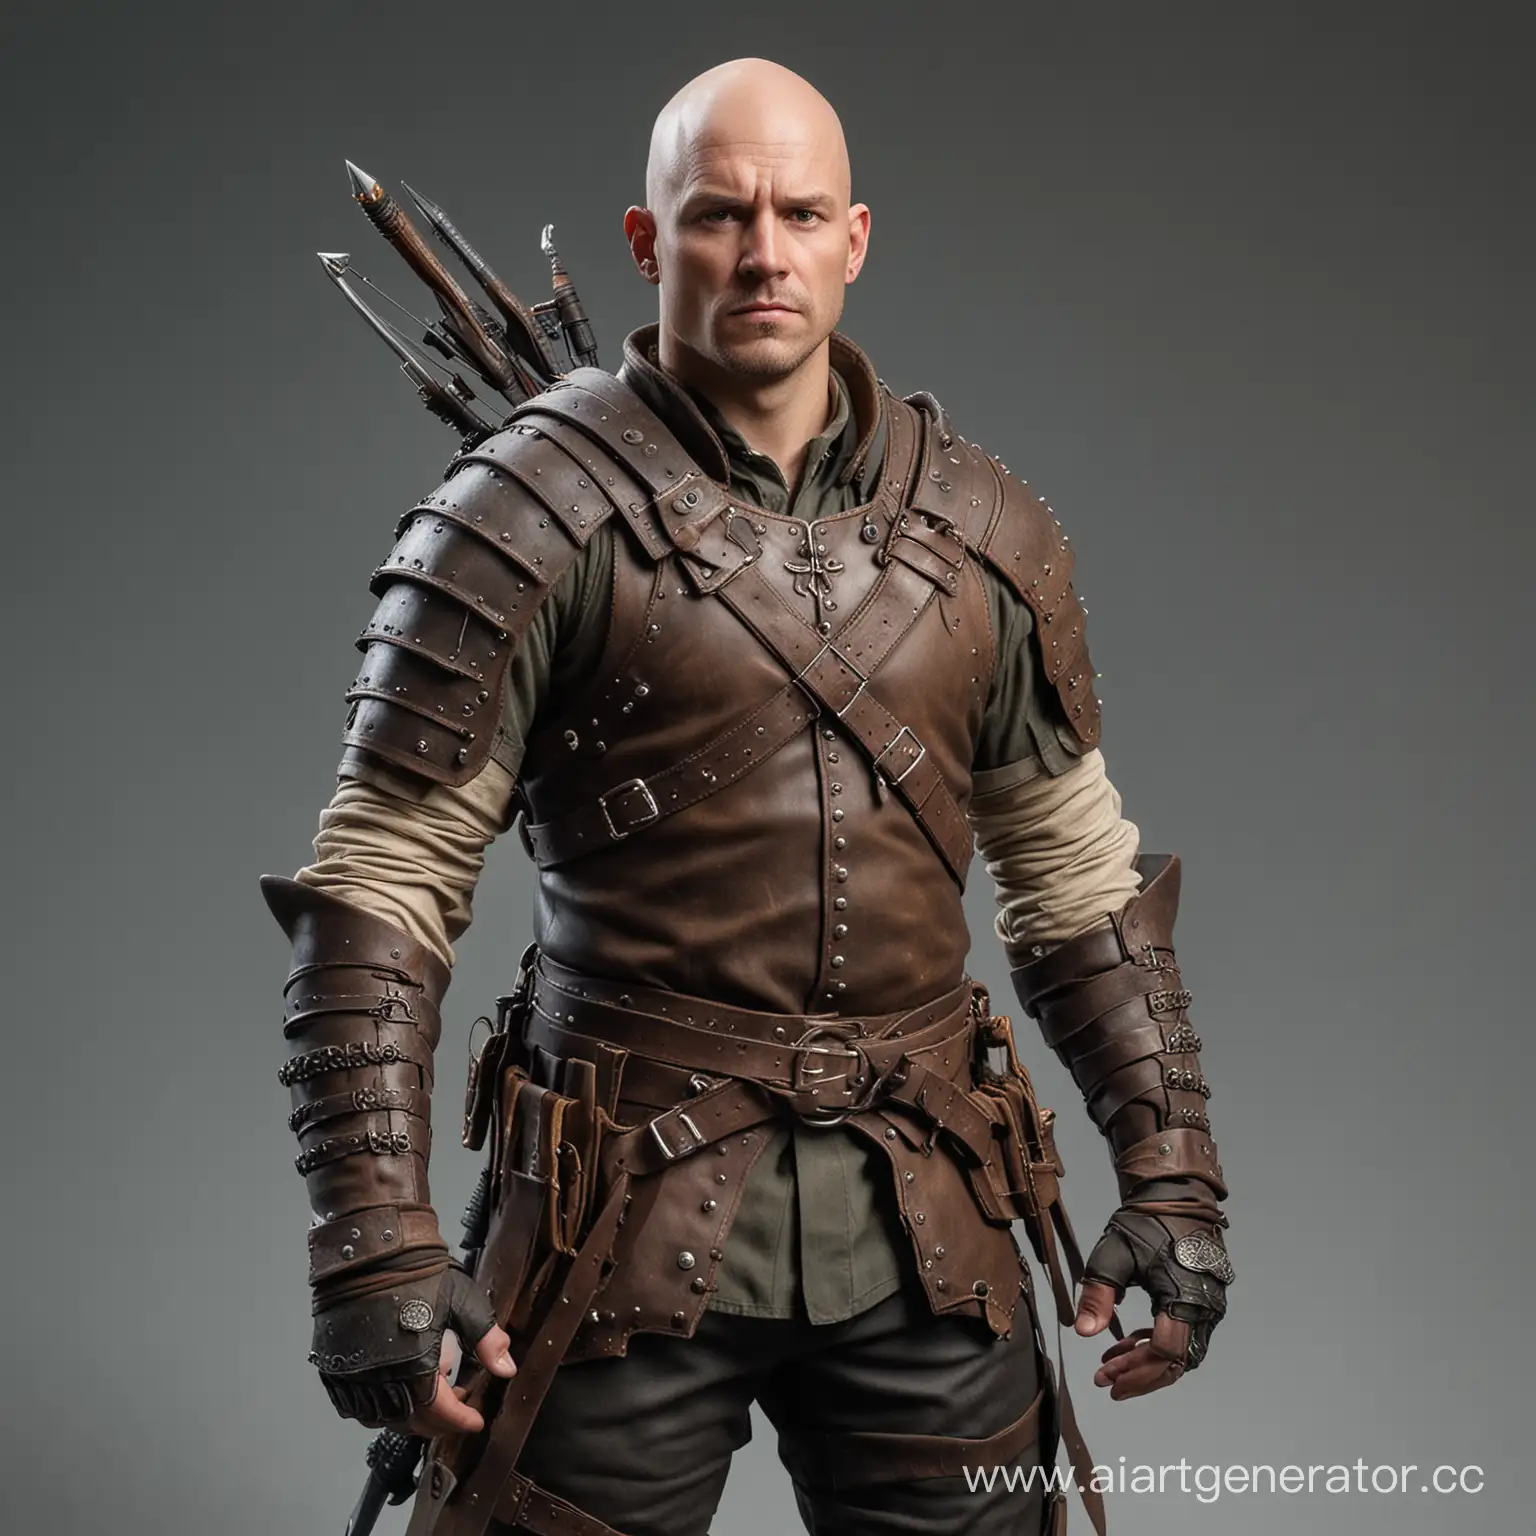 Mature-Bald-Tracker-with-Scar-in-Riveted-Leather-Armor-Holding-Short-Bow